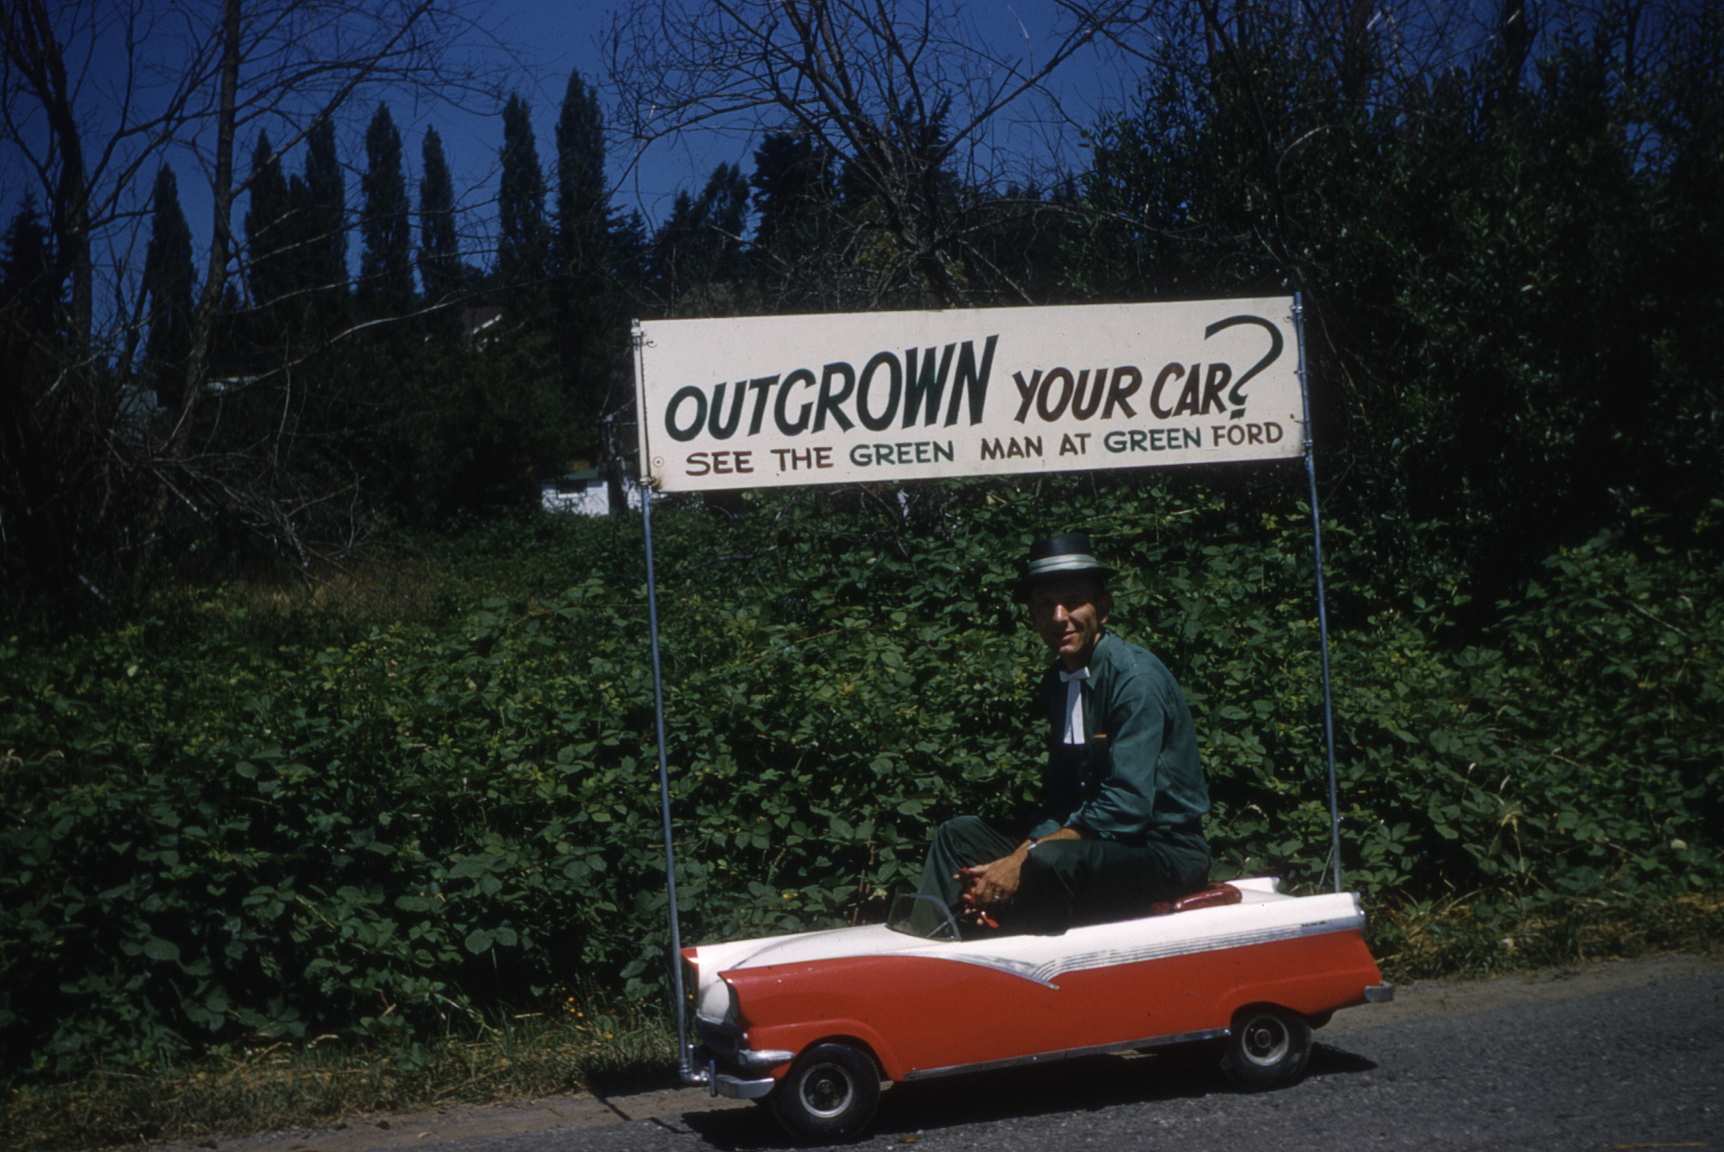 Promoting his car dealership, Green Ford, second-generation owner Ron Green rides in a scale model of a a 1956 Ford convertible. His father began the business as Green's Garage in 1919, changing the name to Green Motor Co. in 1930. After 1954, under Ron Green's ownership, it became Green Ford until its sale to Tom Chapman in 1965.